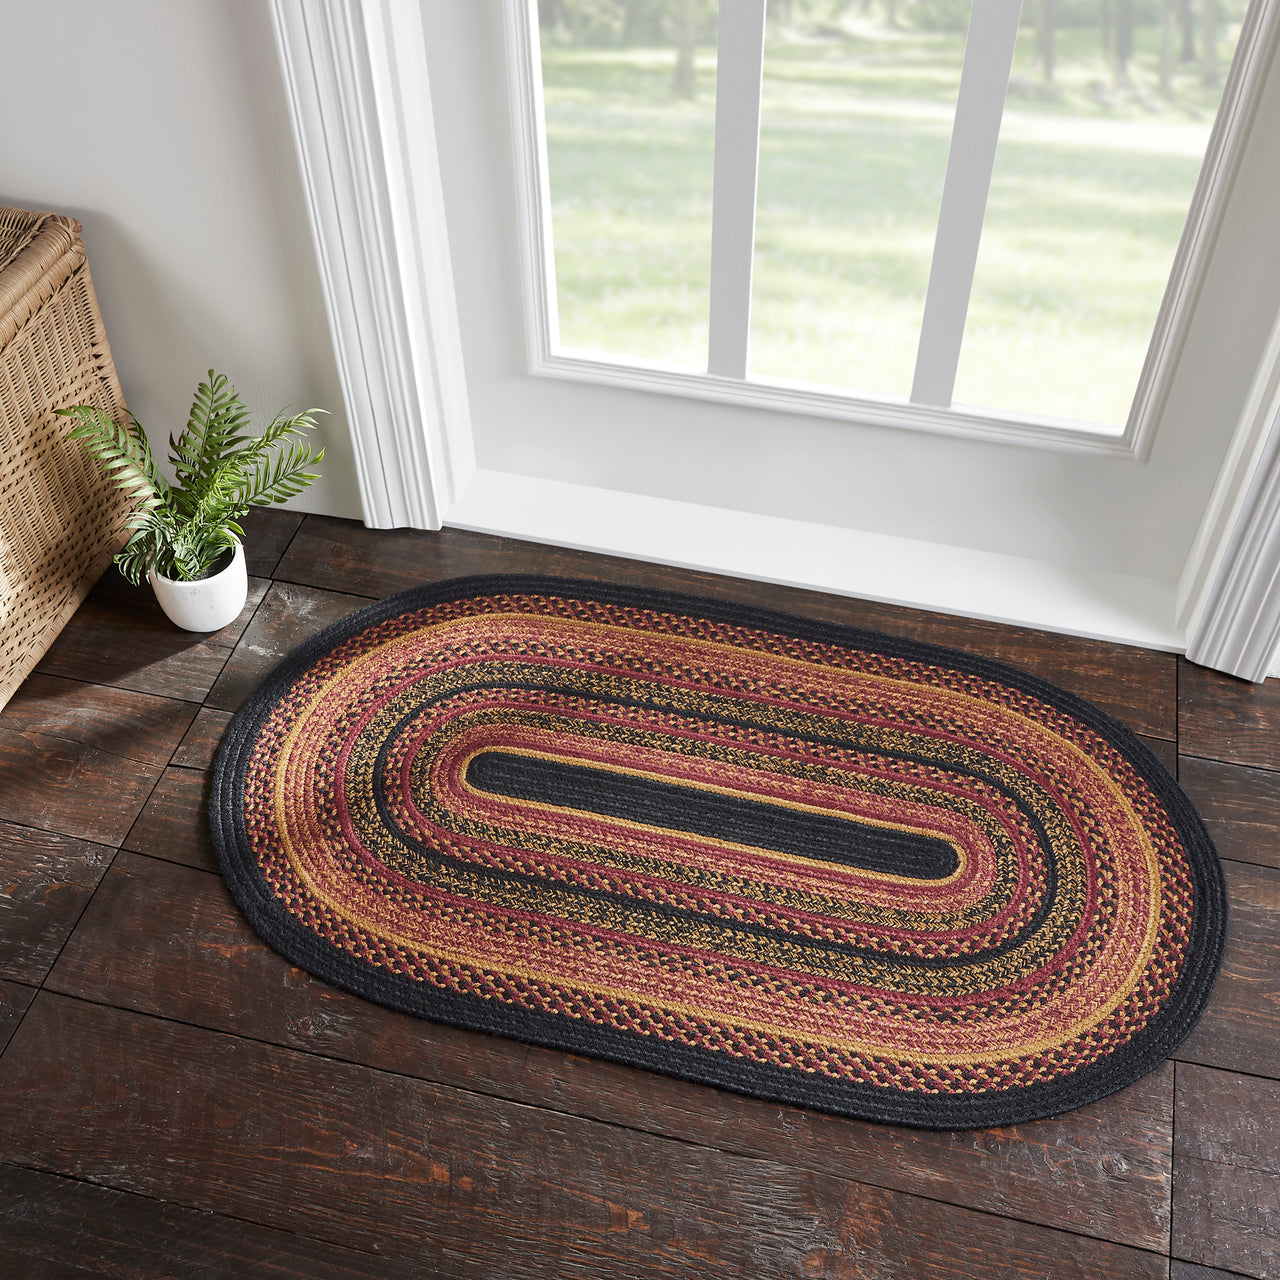 Heritage Farms Jute Braided Rug Oval with Rug Pad 27"x48" VHC Brands